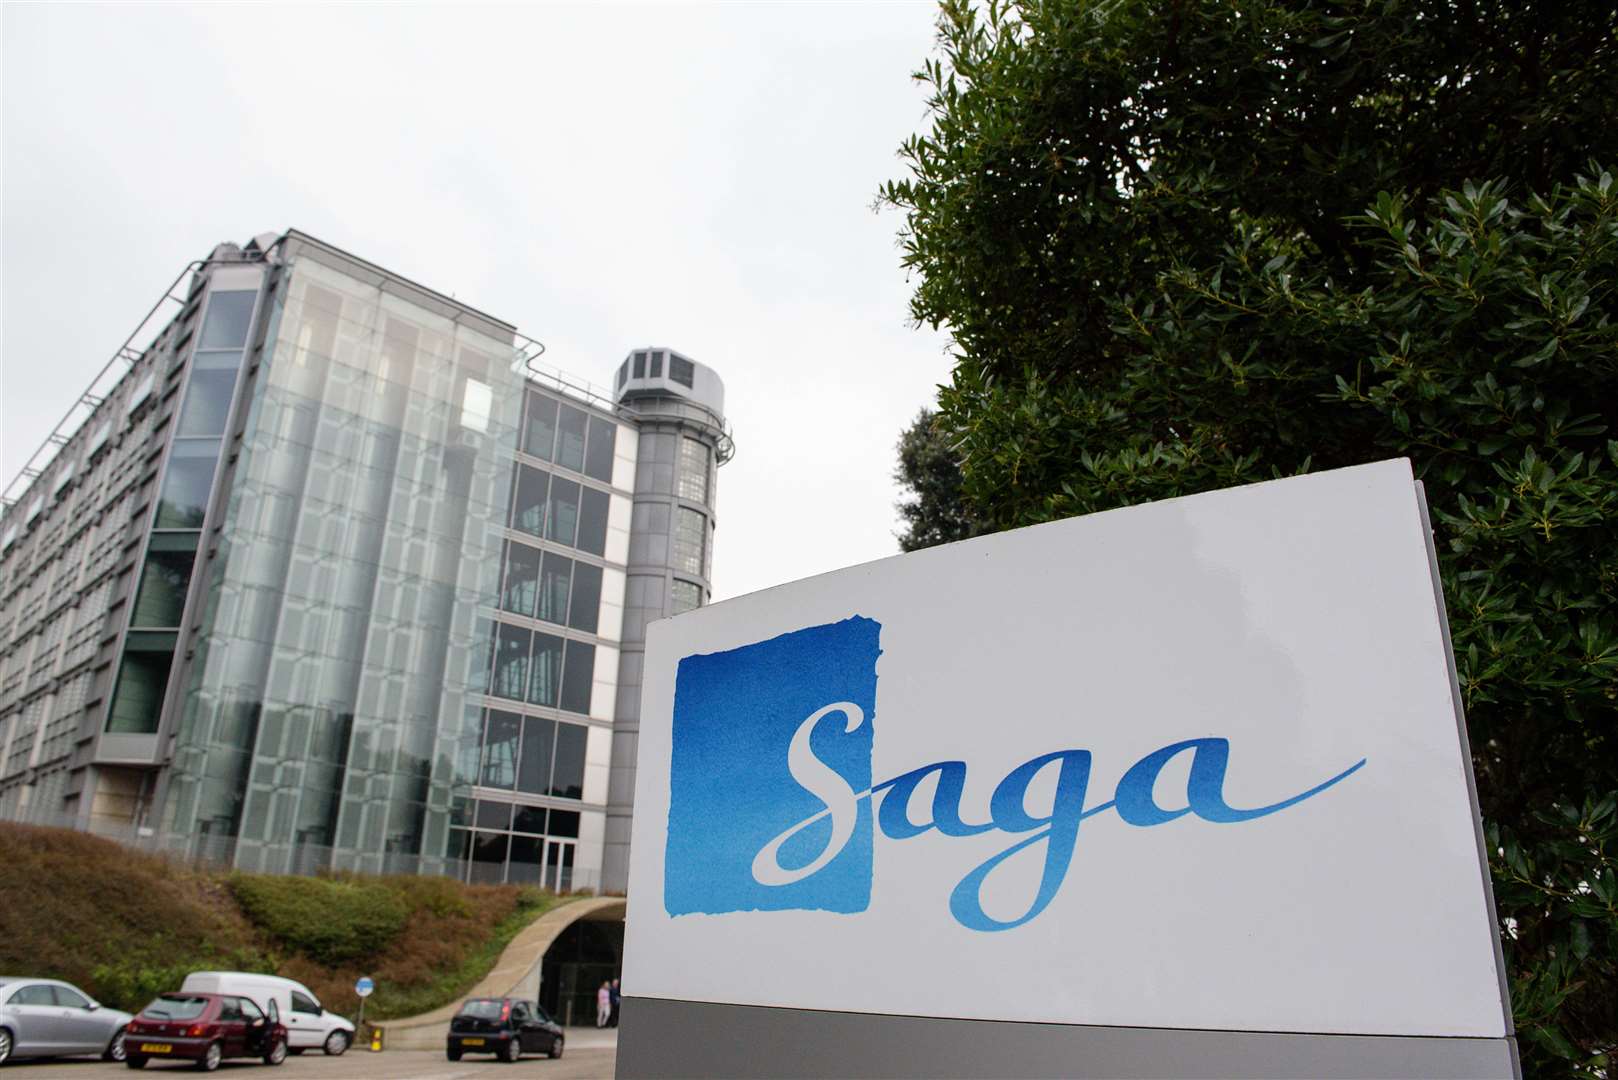 Saga's travel business has been in limbo since the pandemic arrived in 2020